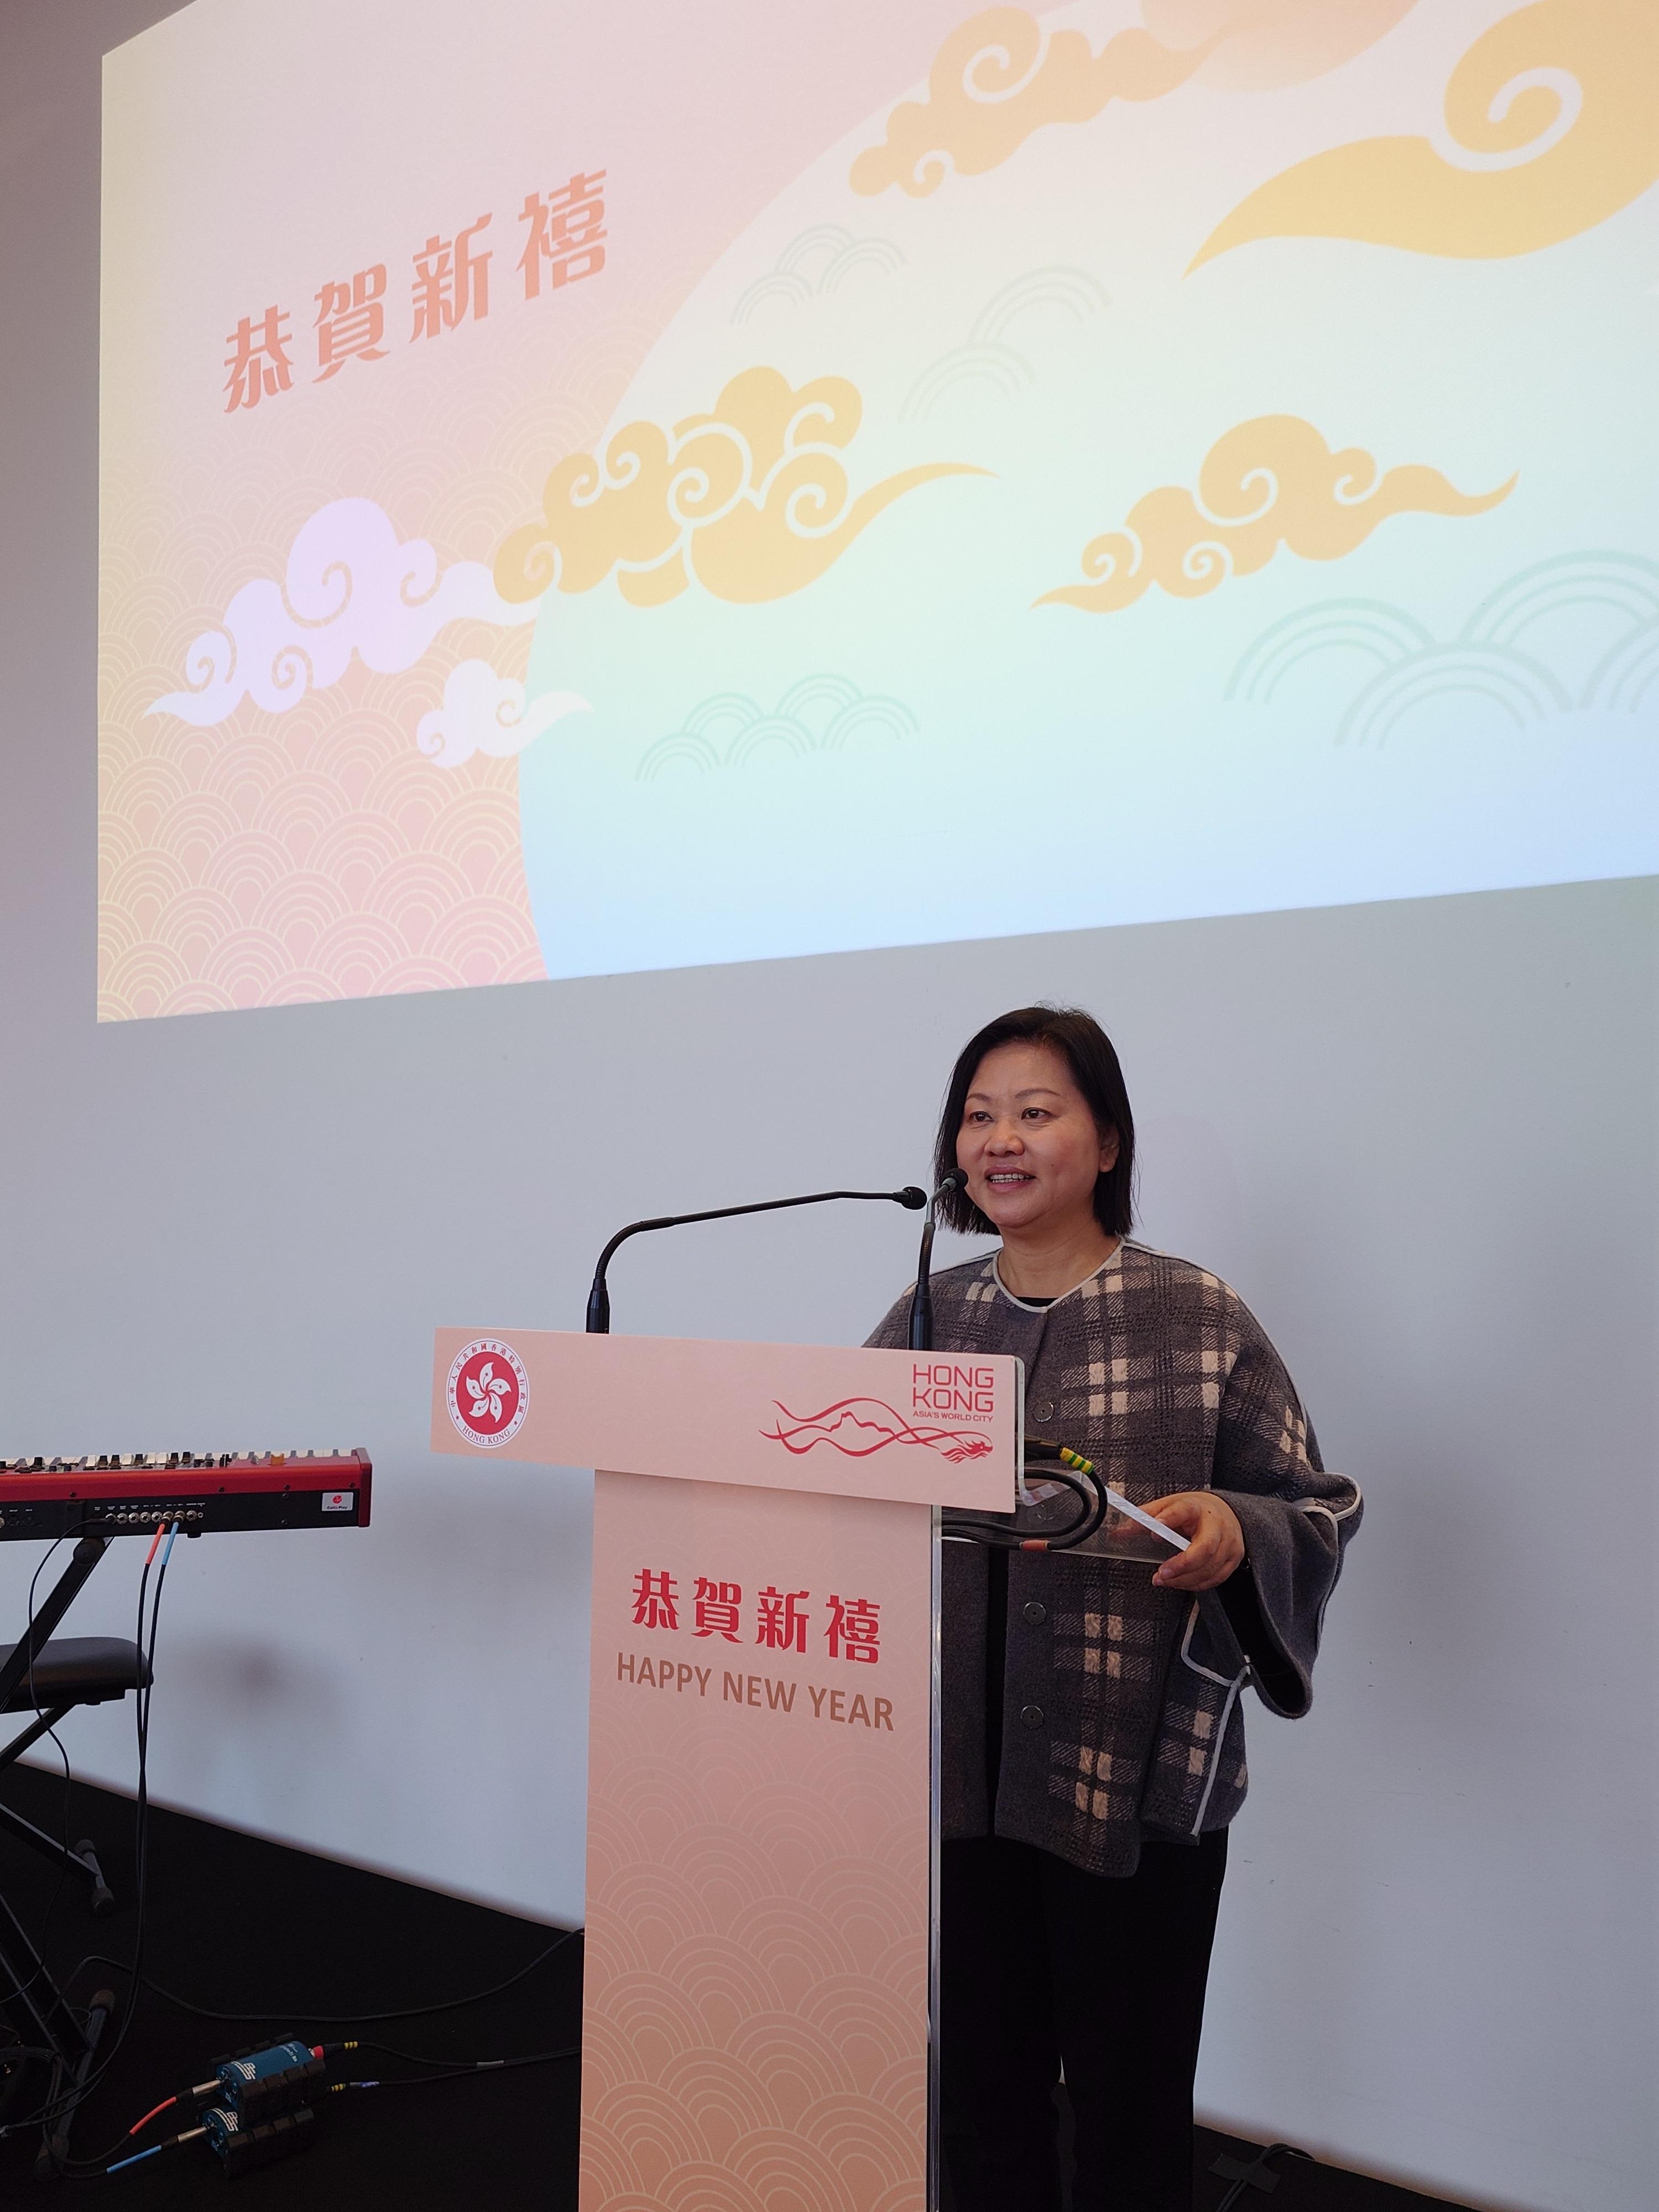 The Special Representative for Hong Kong Economic and Trade Affairs to the European Union, Ms Shirley Yung, addressed the audience at the Chinese New Year reception in Lisbon, Portugal, on February 22.